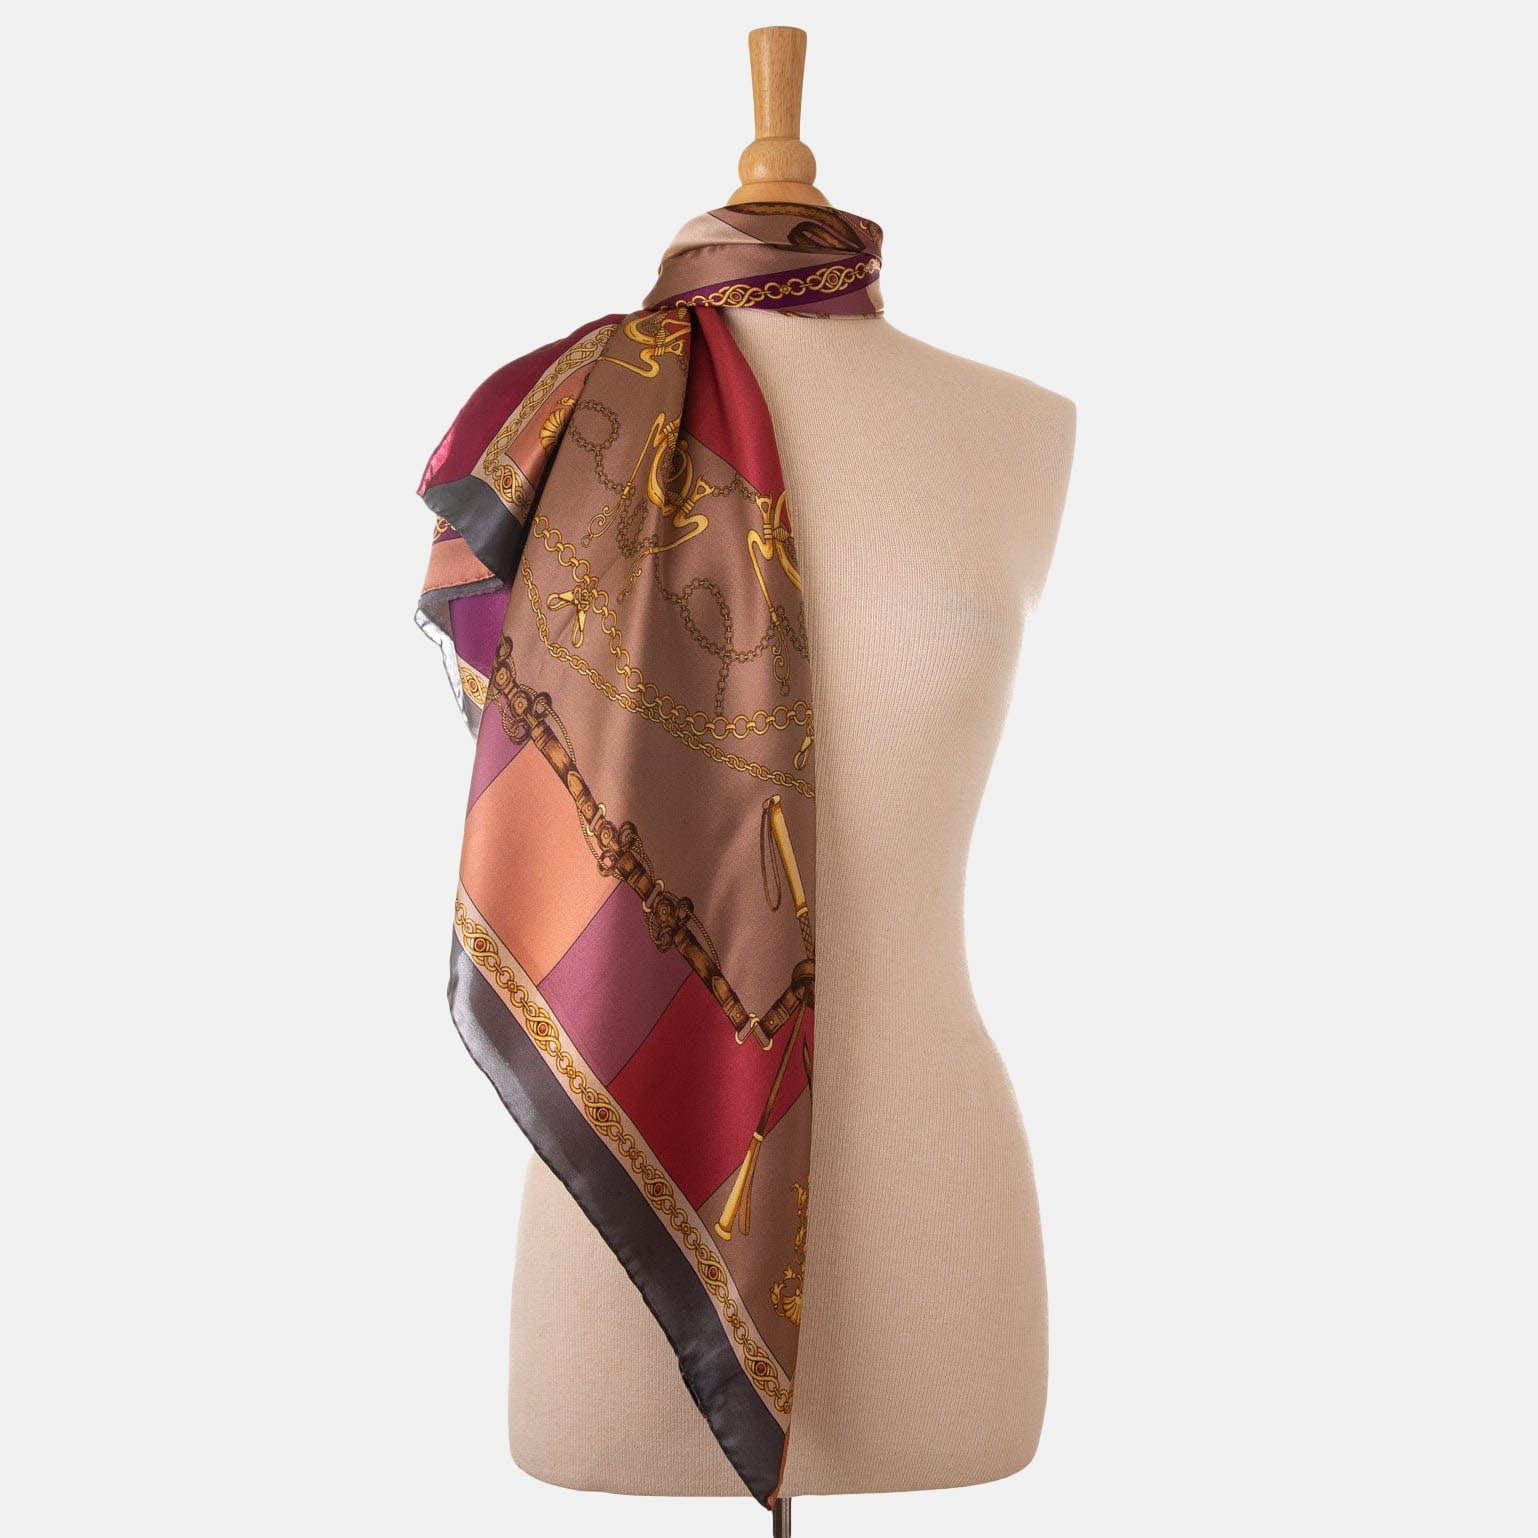 Lot - Louis Vuitton Oversized Scarf. Made in Italy